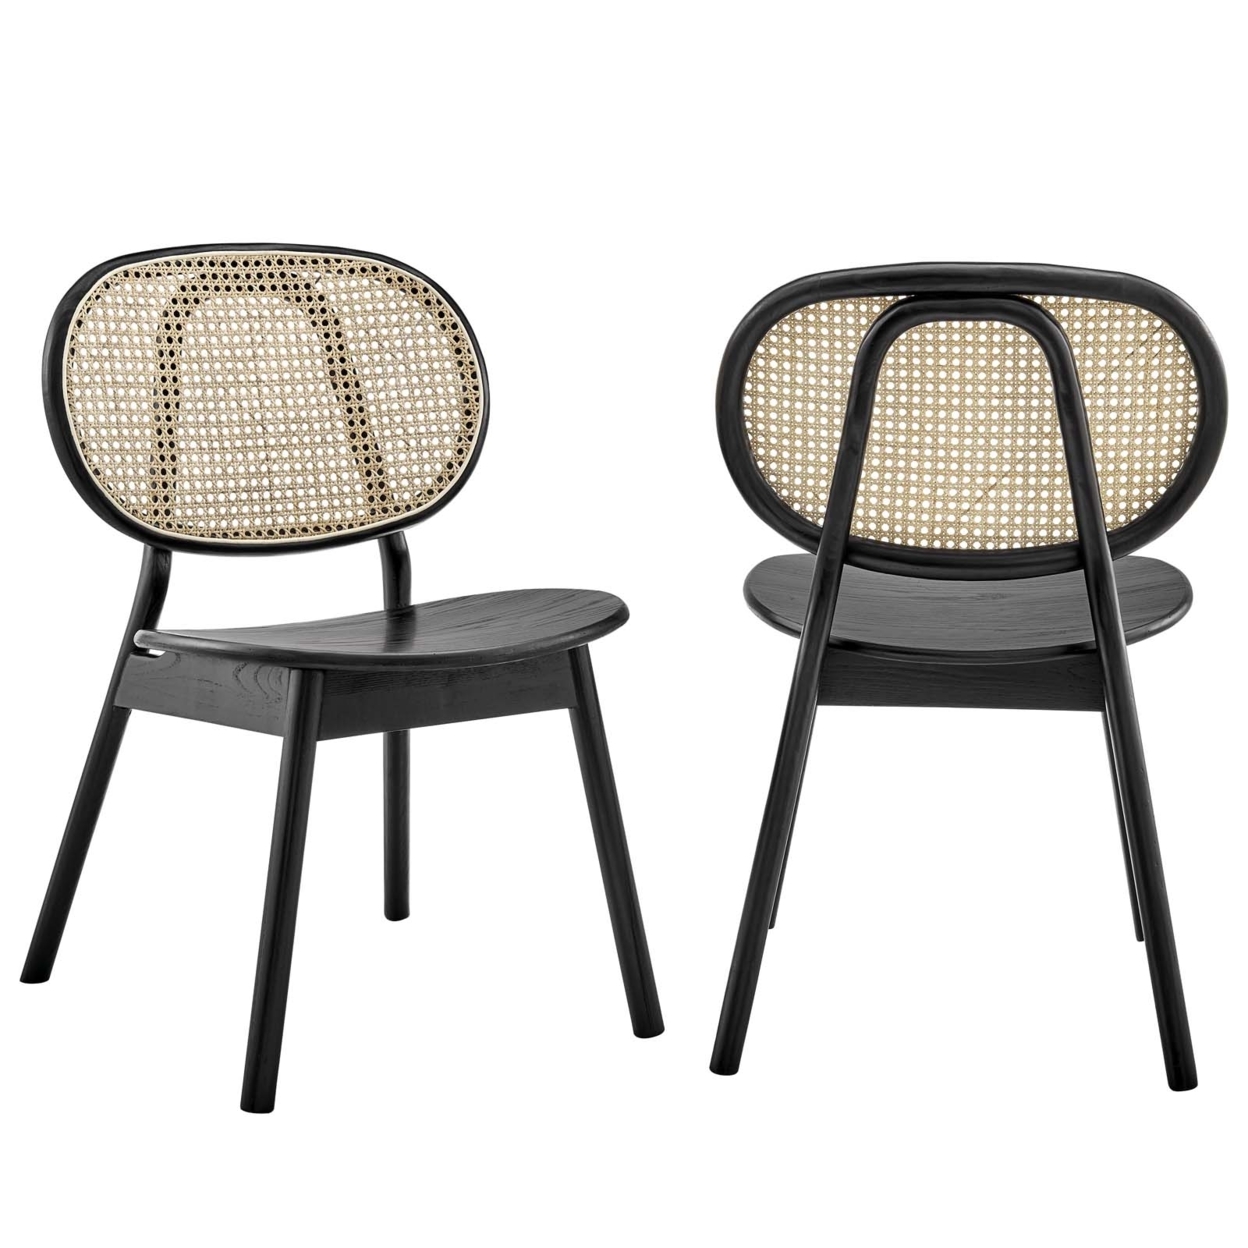 Malina Wood Dining Side Chair Set Of 2, Black